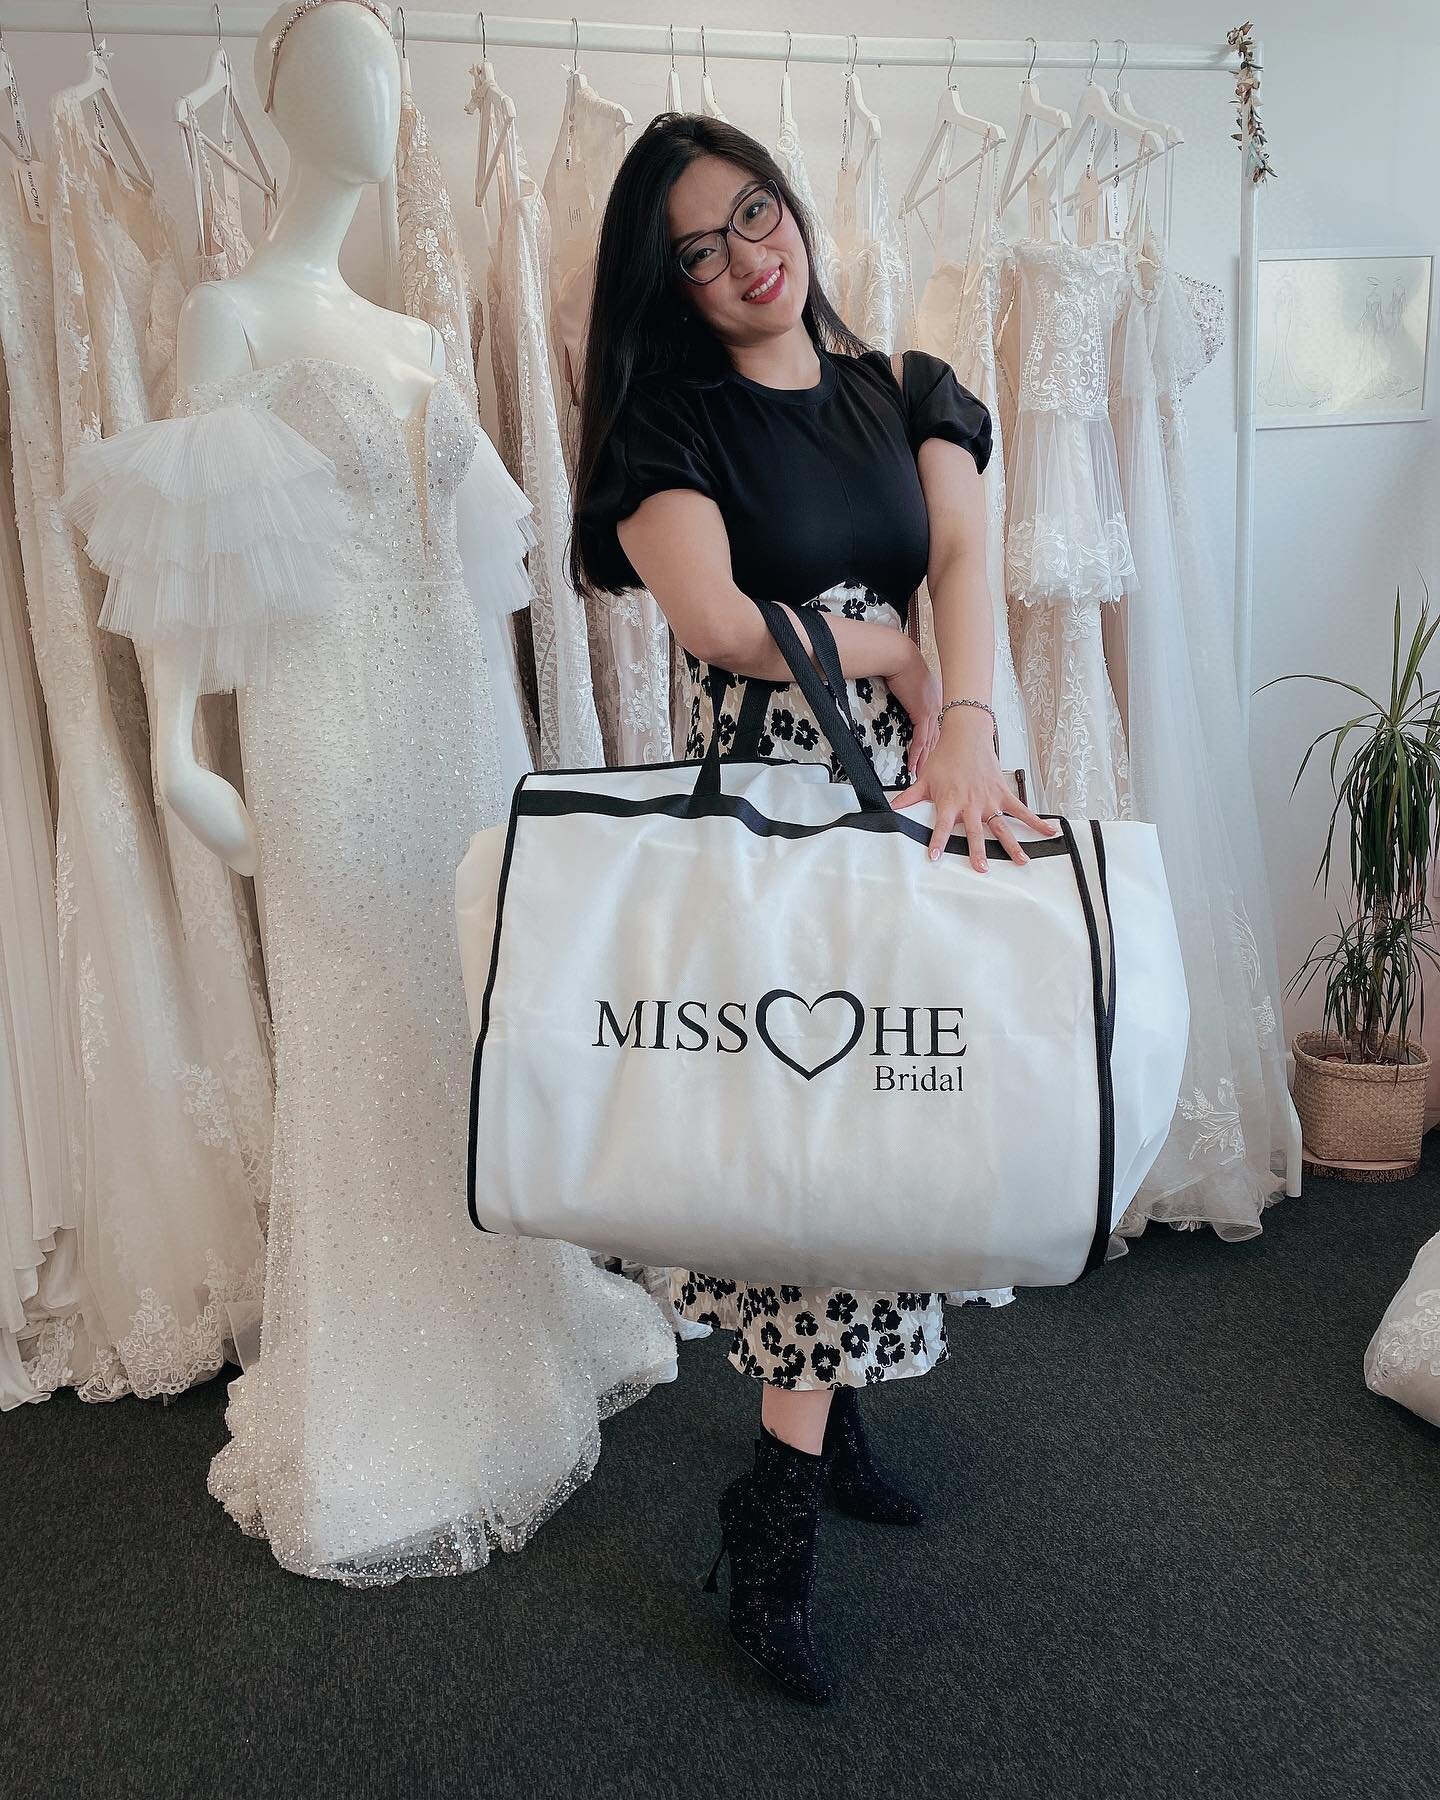 Ruby&rsquo;s final fitting &amp; collection day 😃 we&rsquo;ve had so much fun this afternoon 🥰

I know Ruby through our previous bride, yes the power of word of mouth 👄 

My job satisfaction is not only you are my bride/ client, most importantly i